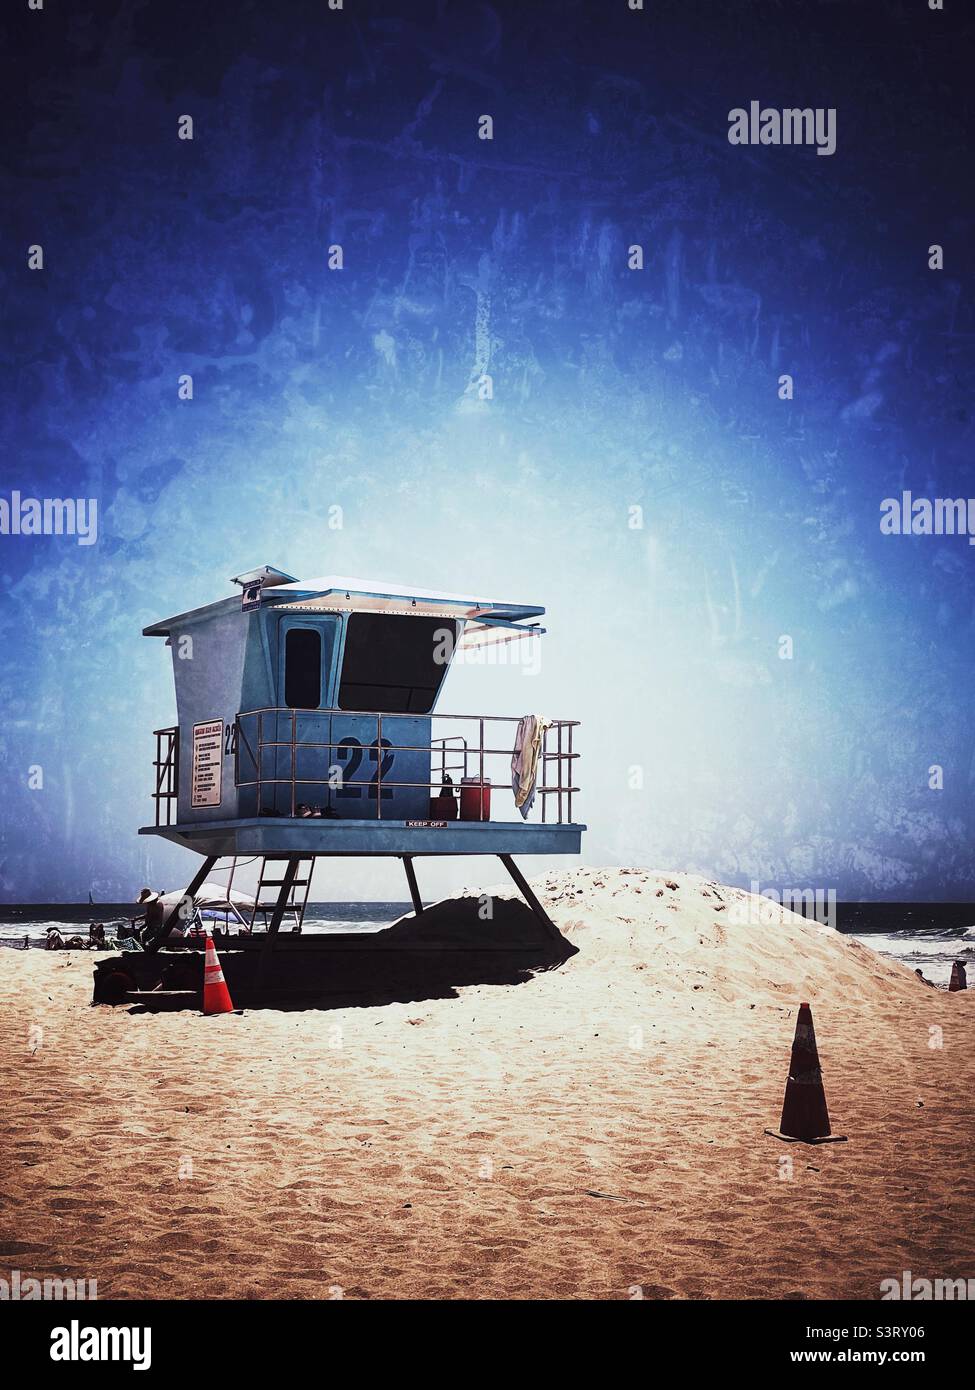 Lifeguard stand on sandy beach on a hot sunny day with ocean in the distance. Stock Photo